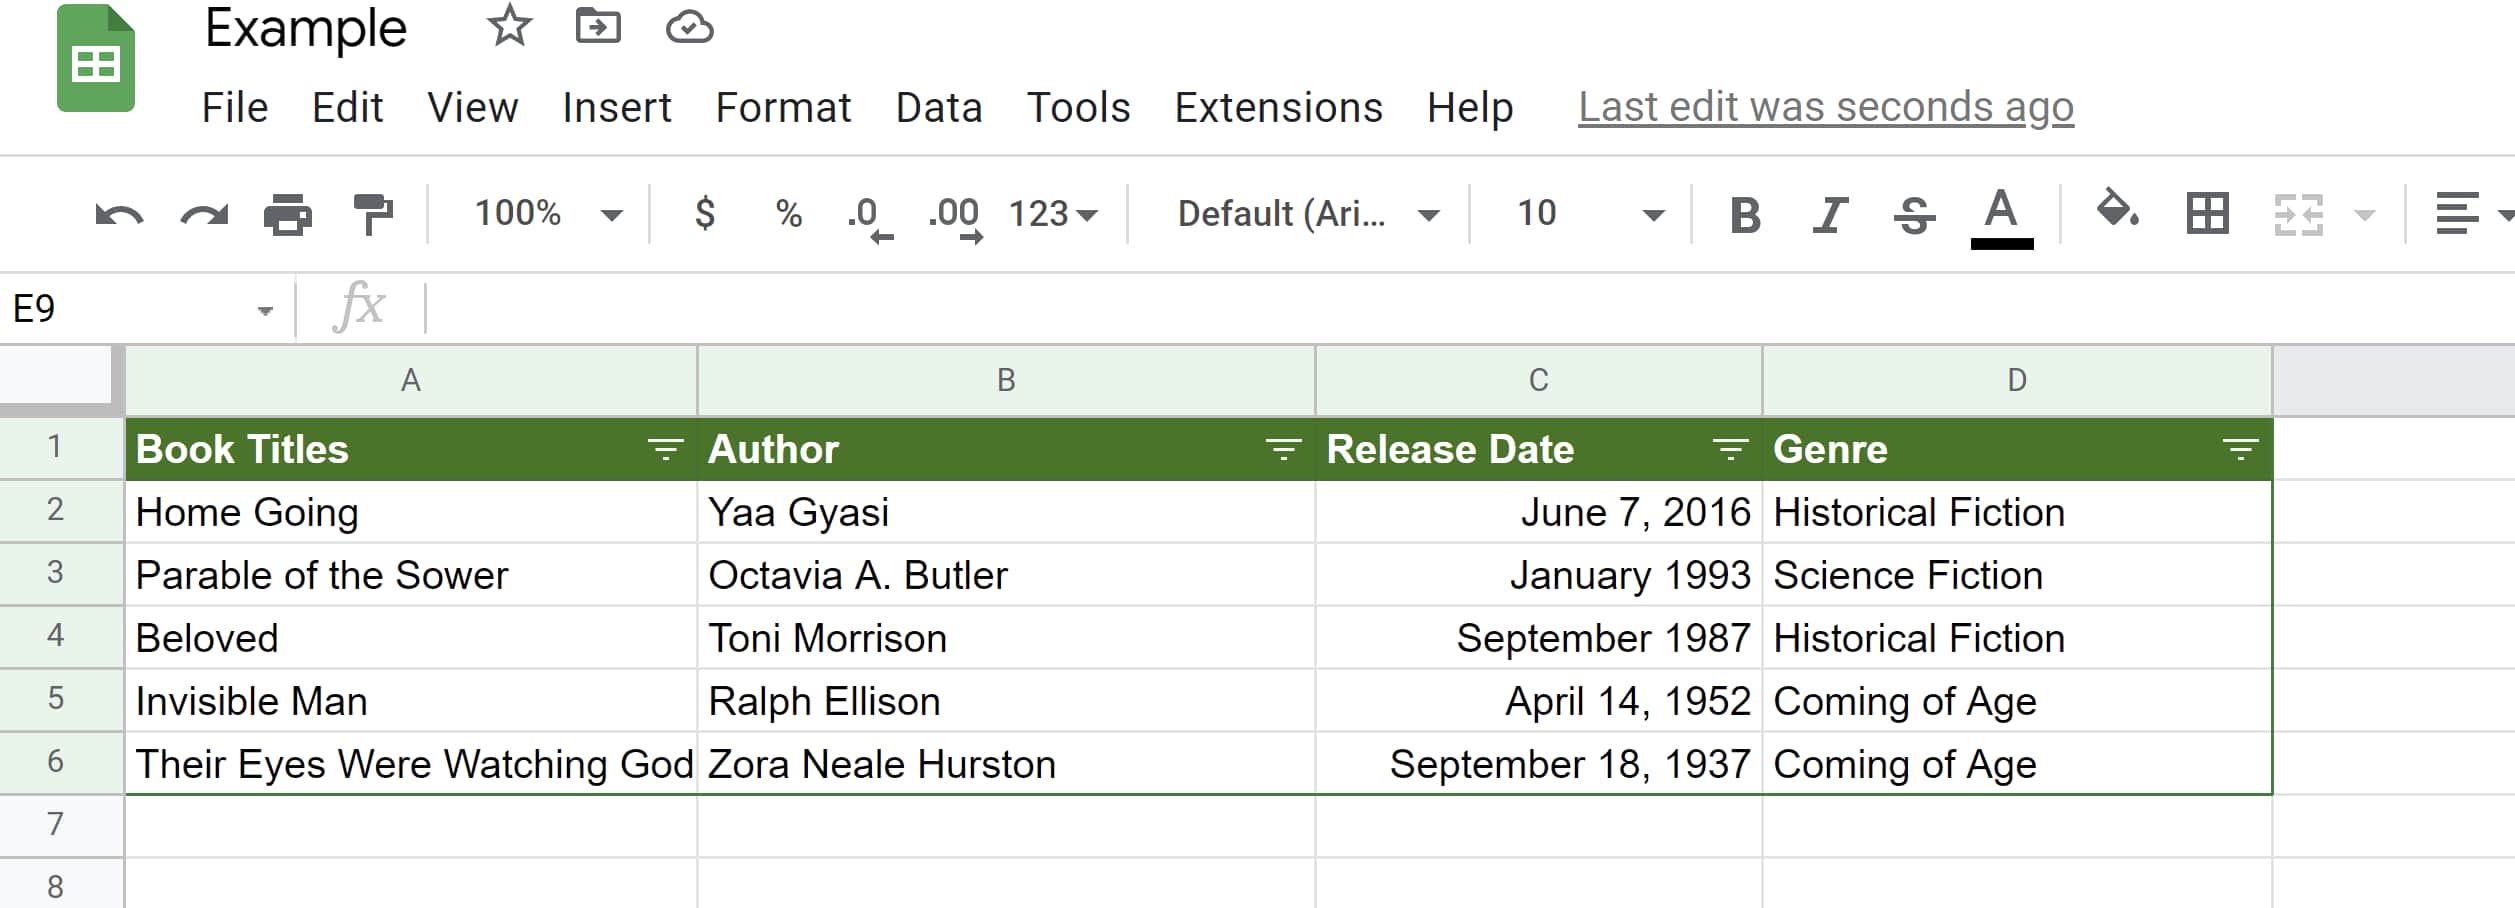 Filters created for columns within the Google Sheet chart